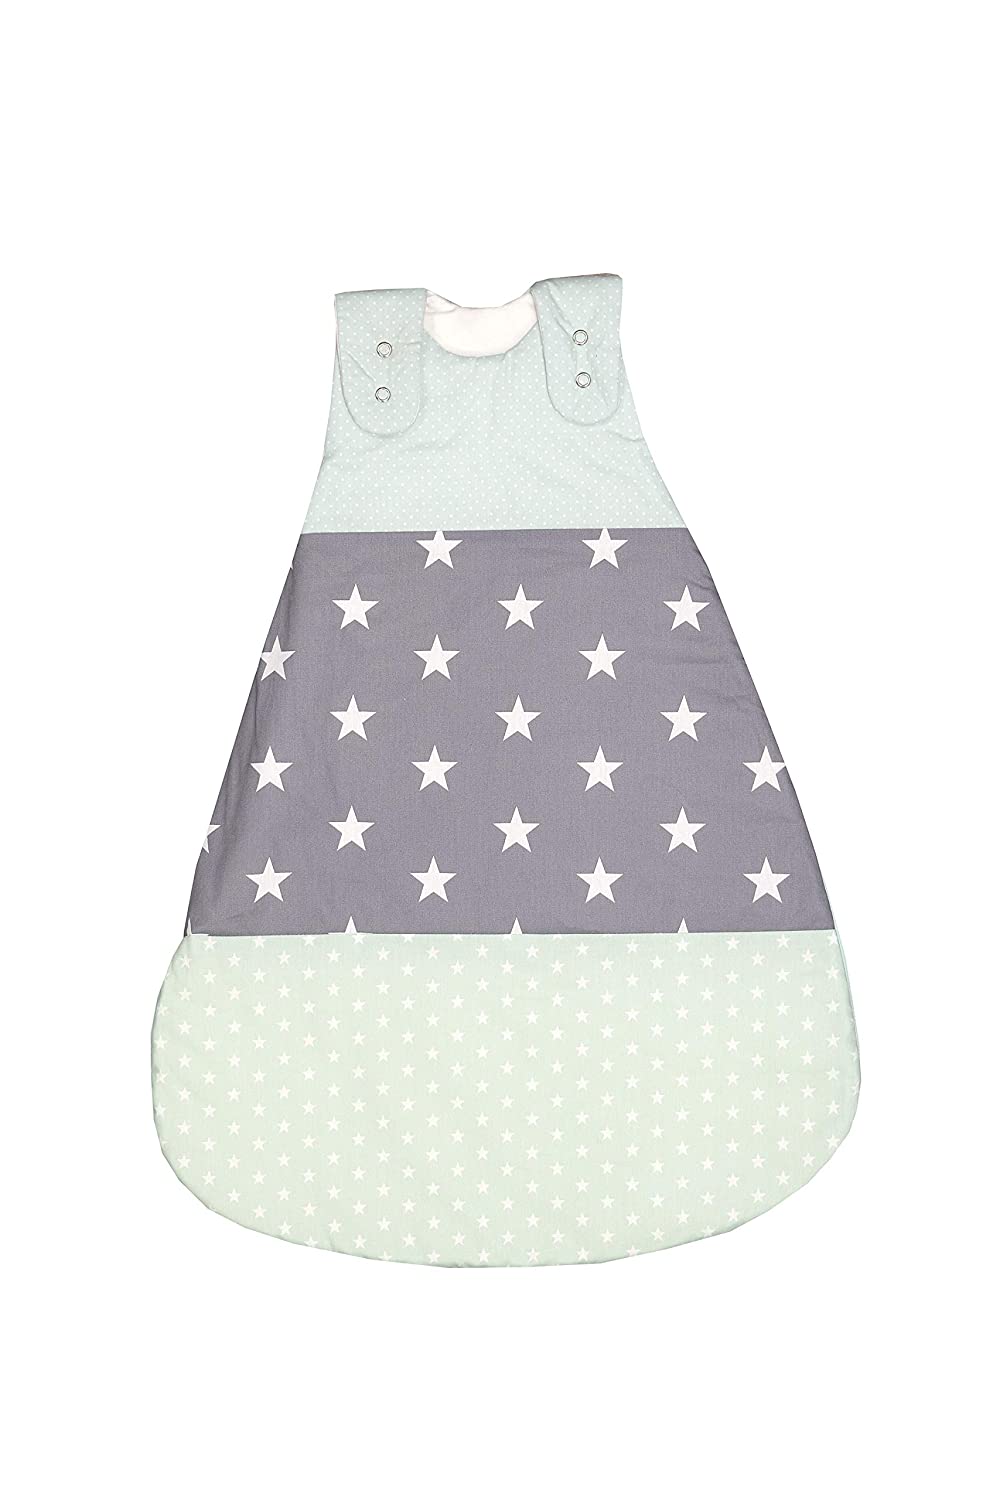 ULLENBOOM® Baby Sleeping Bag, 0 to 18 Months, Sizes: 56 / 62 / 68 / 74 / 80 / 86 (Made in EU) - for Spring, Autumn and Winter, with Motif: Stars.